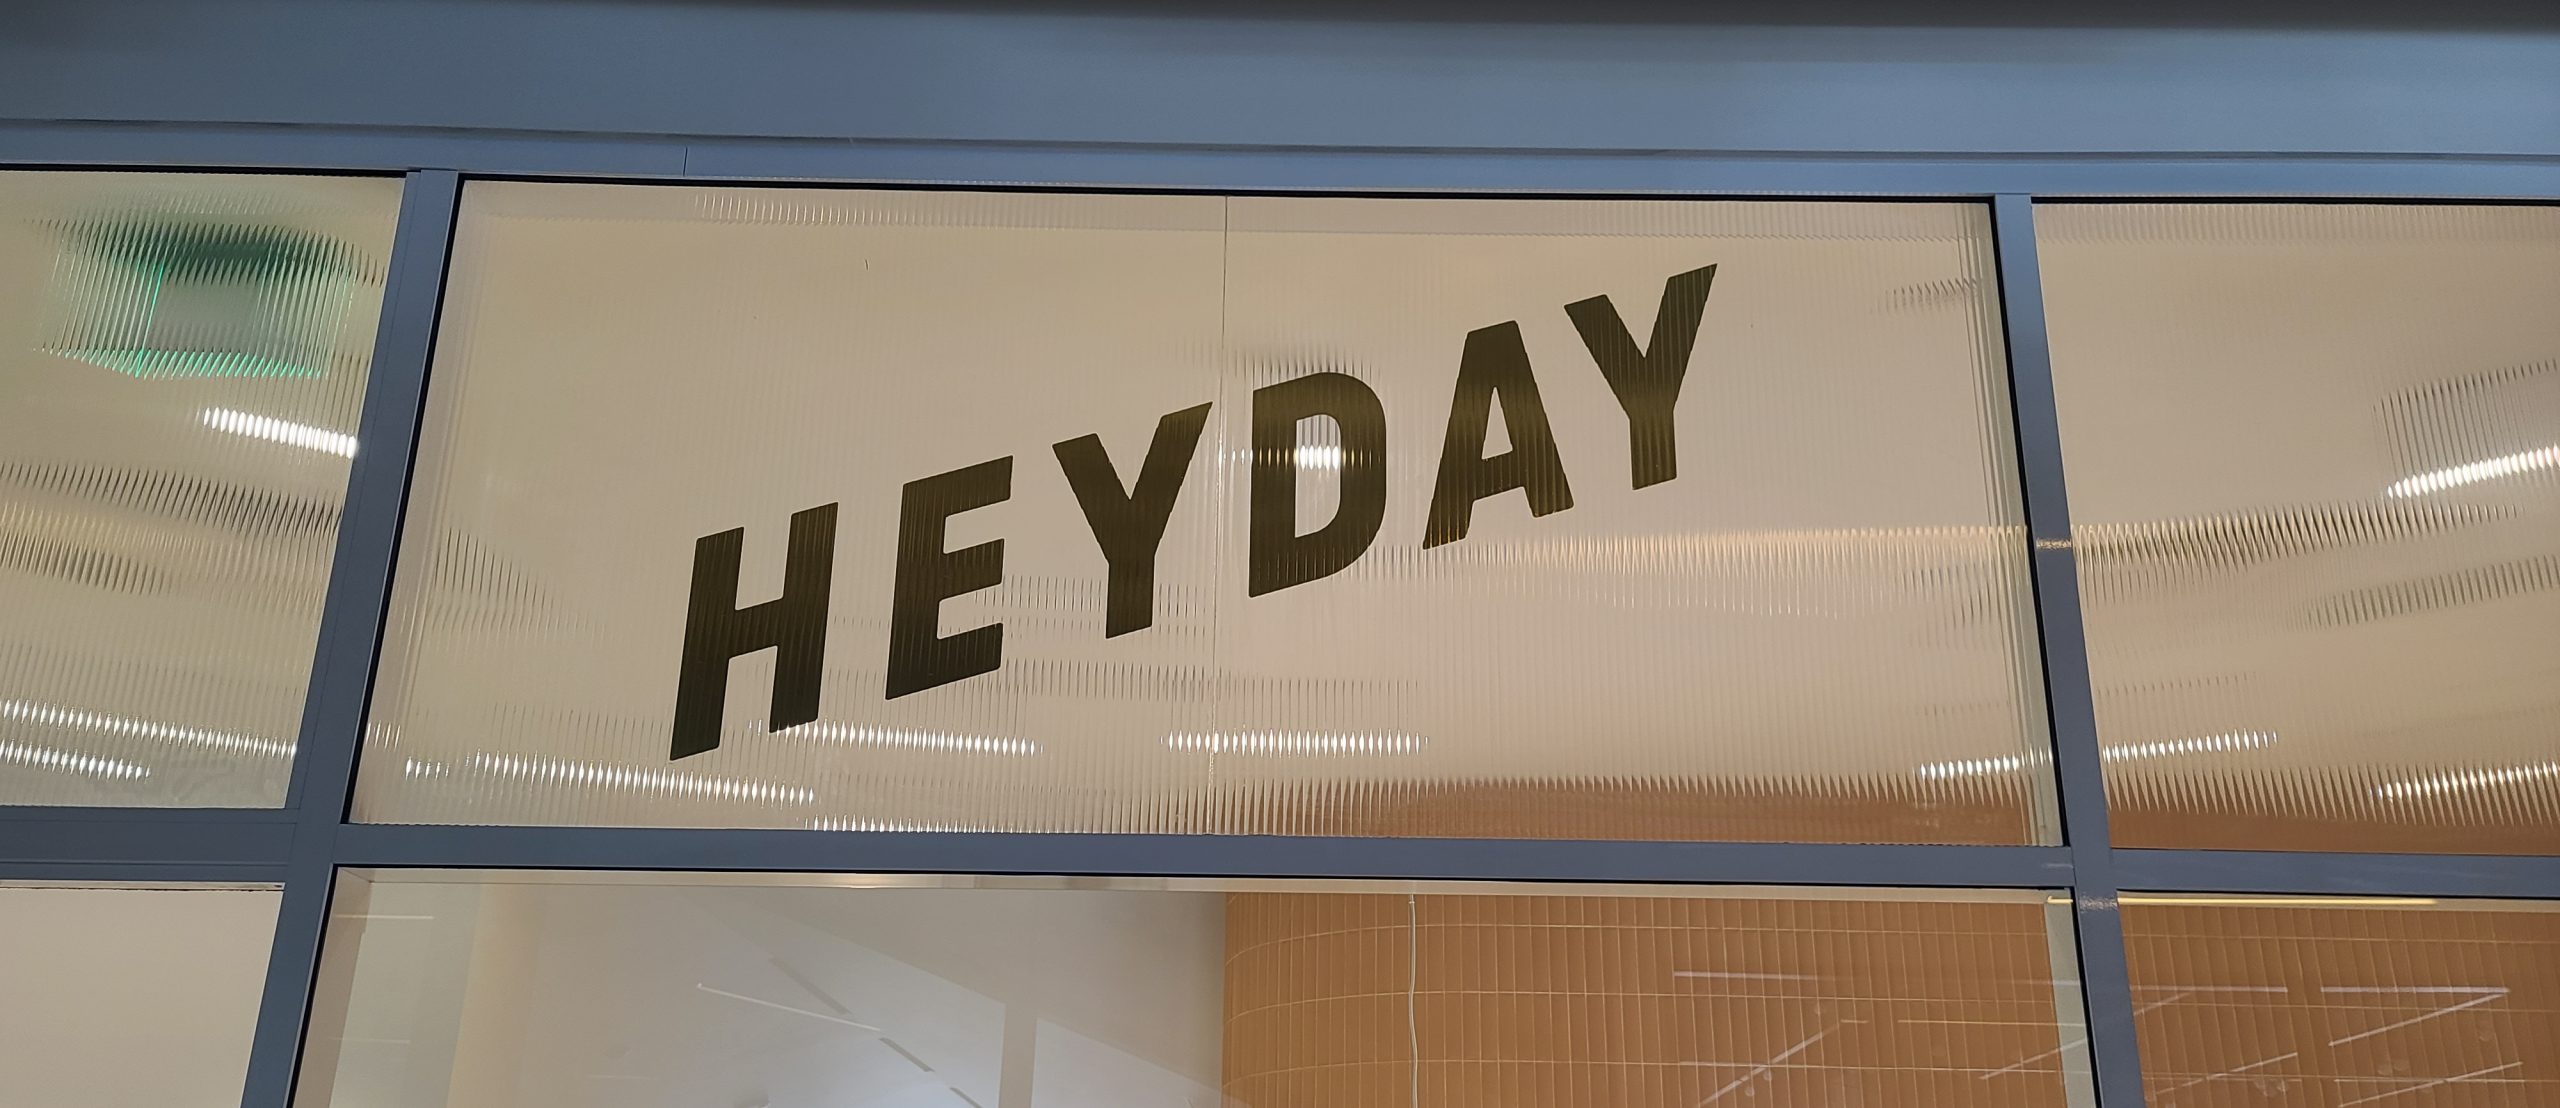 Any surface can be used for signage to boost brand visibility. That's what we did with these window graphics for Hey Day in Los Angeles!